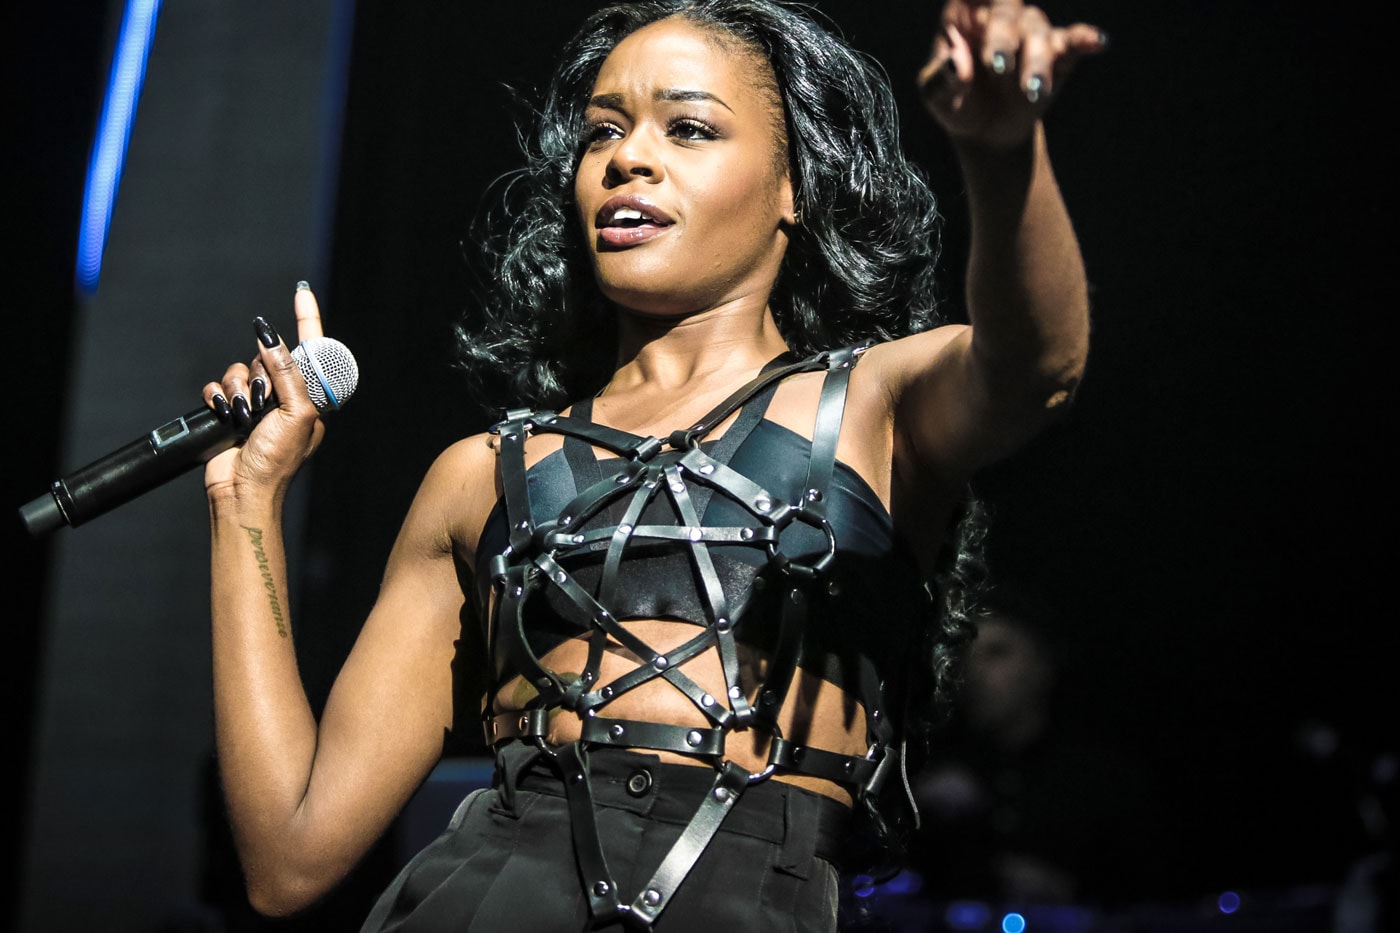 Azealia Banks Can't Release New Music Until March 2016